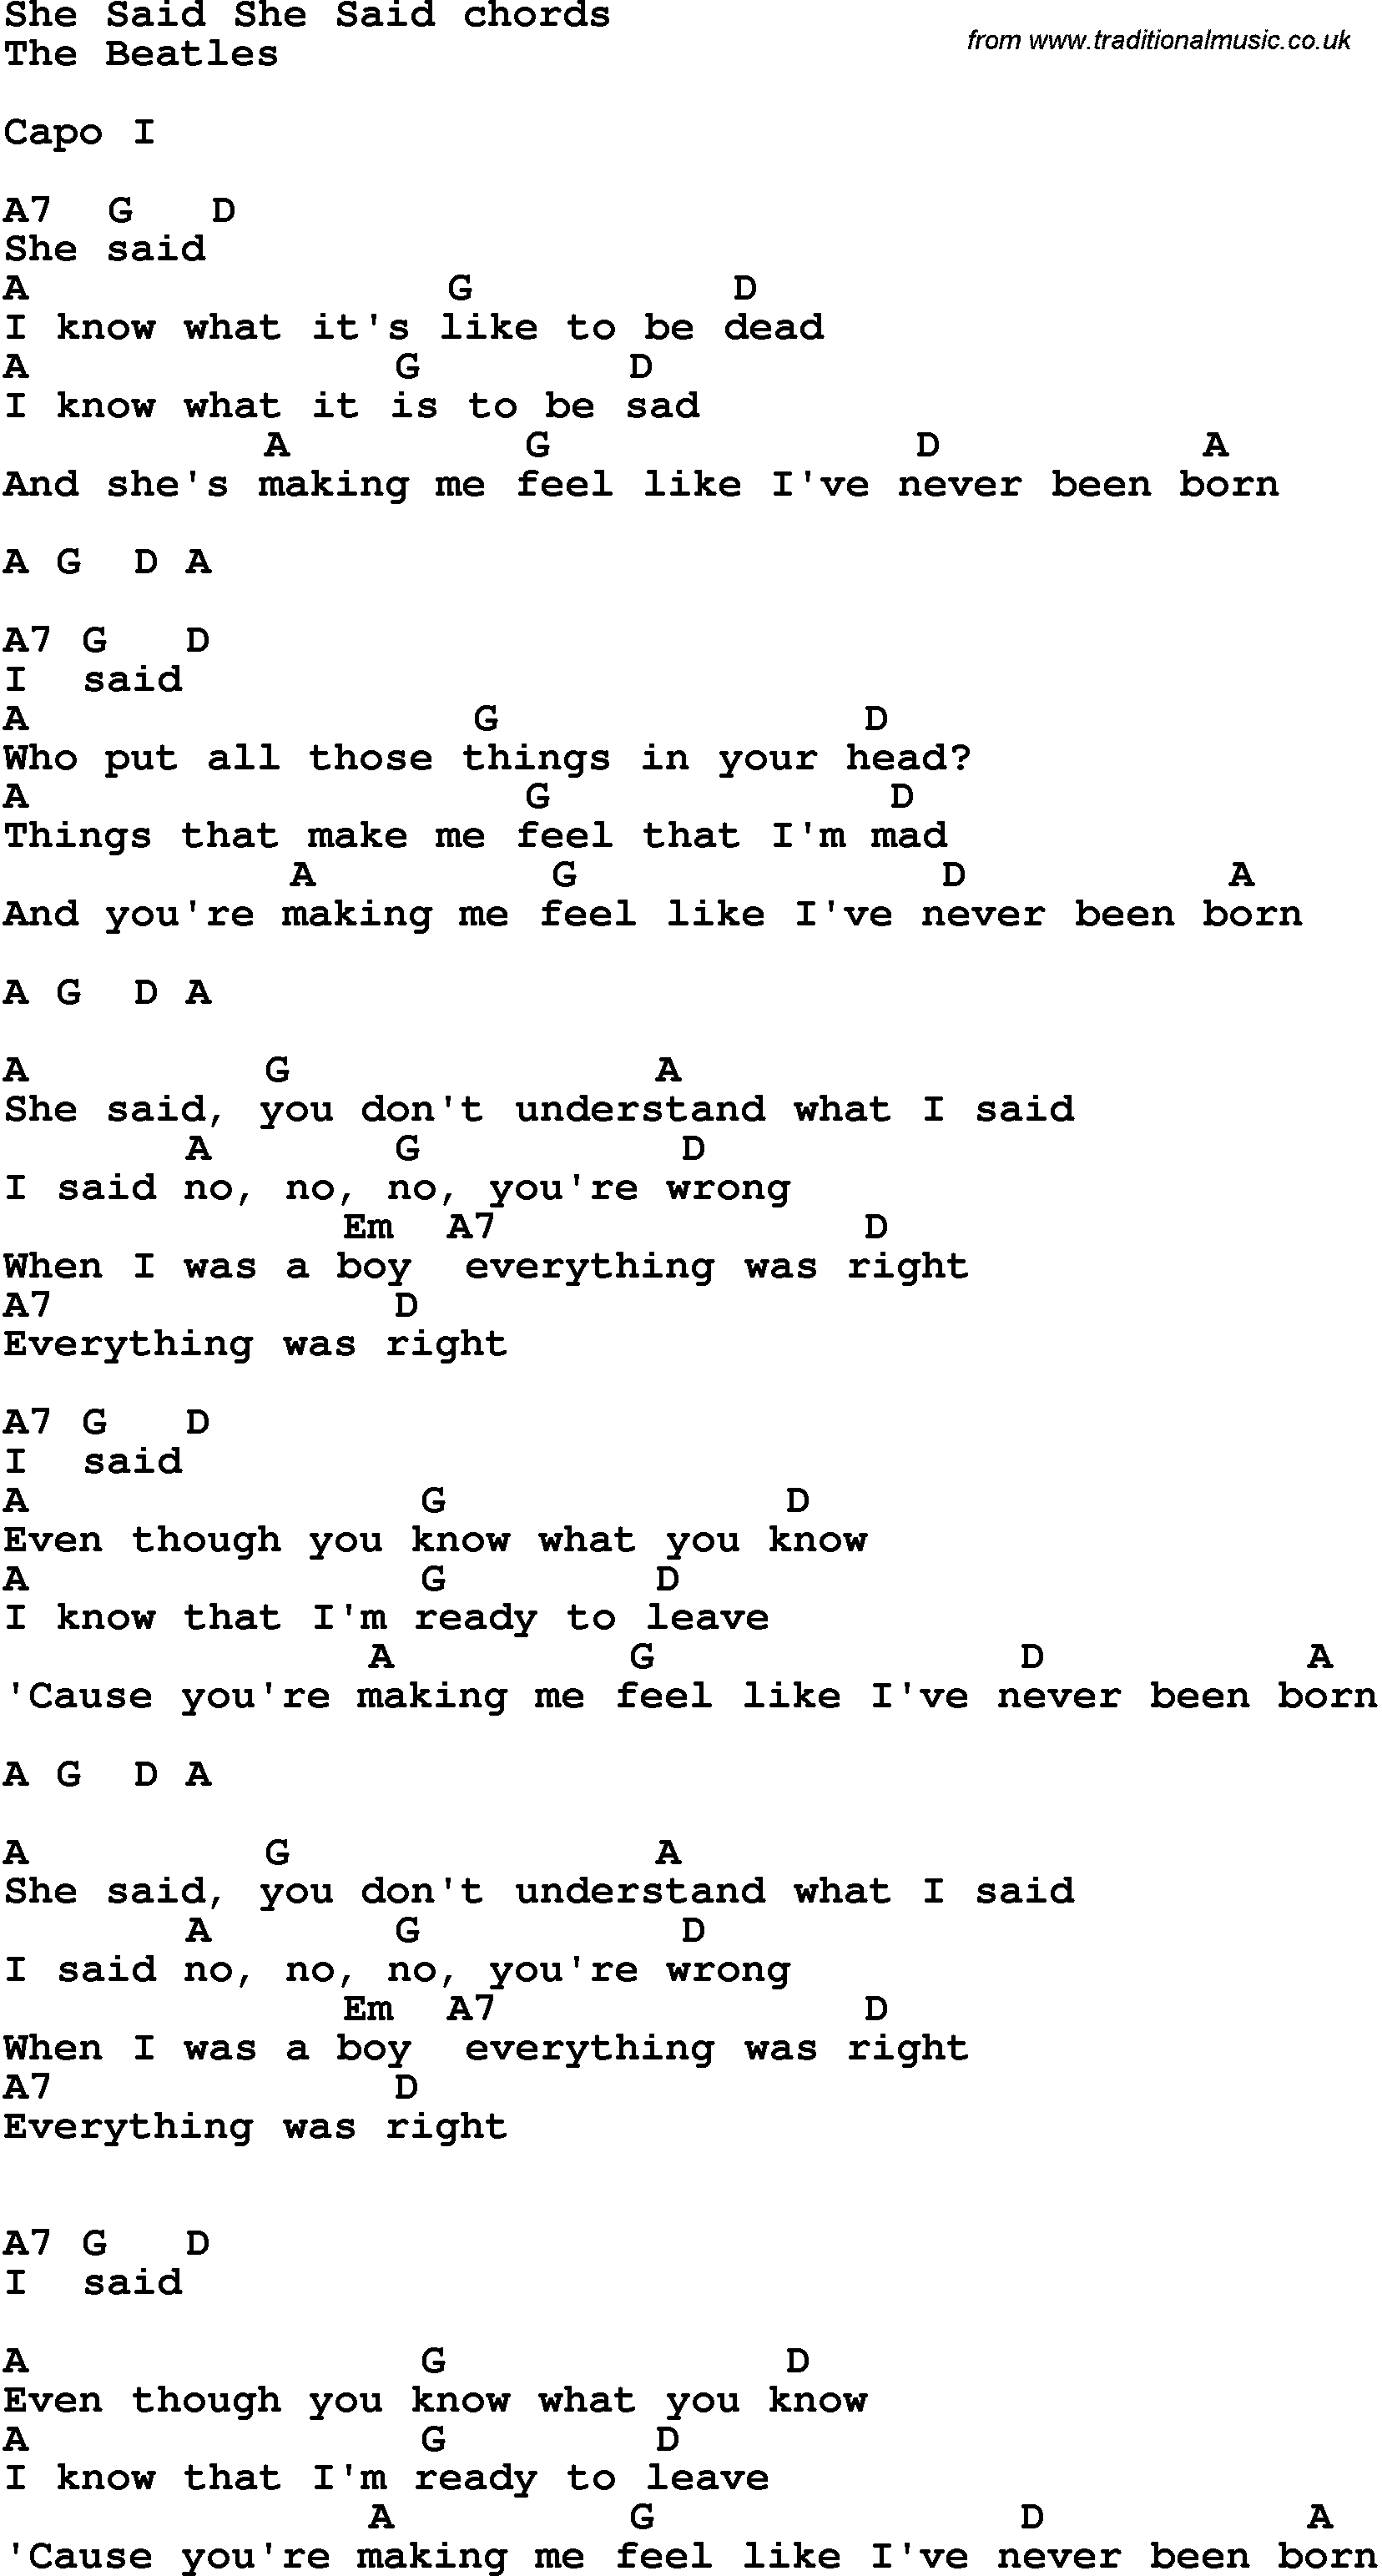 Song Lyrics with guitar chords for She Said She Said - The Beatles